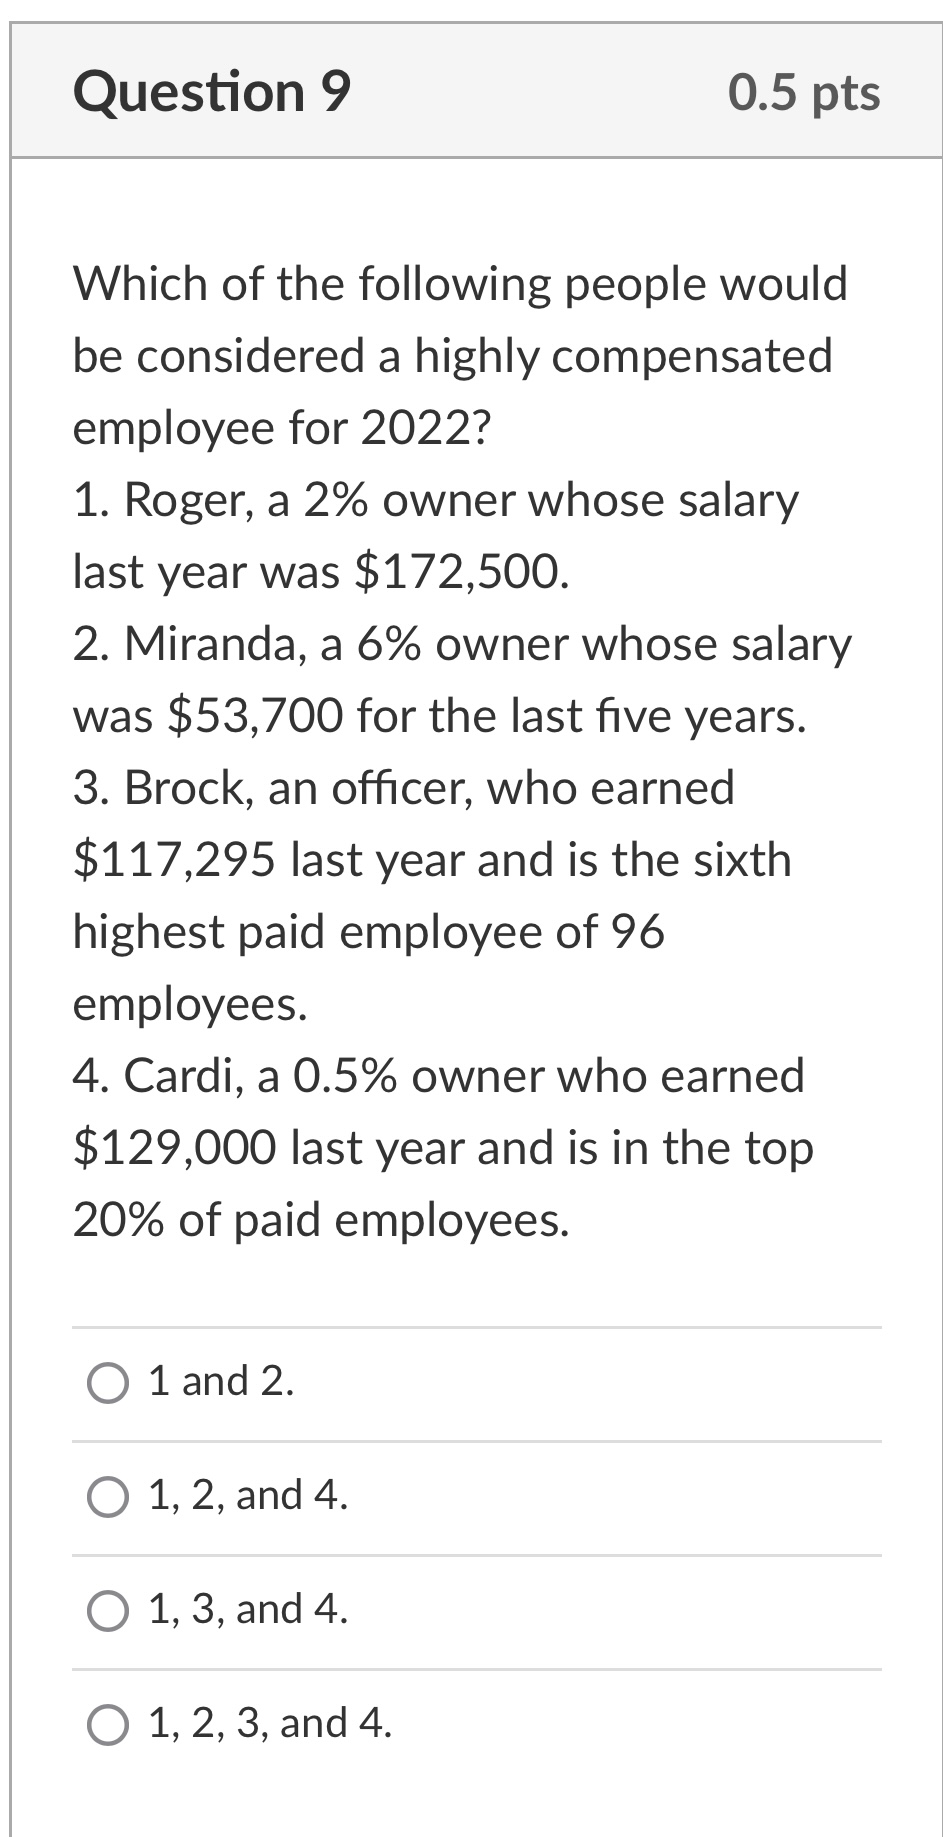 How Do We Identify Highly Compensated Employees for the First Year Our  Company Exists?